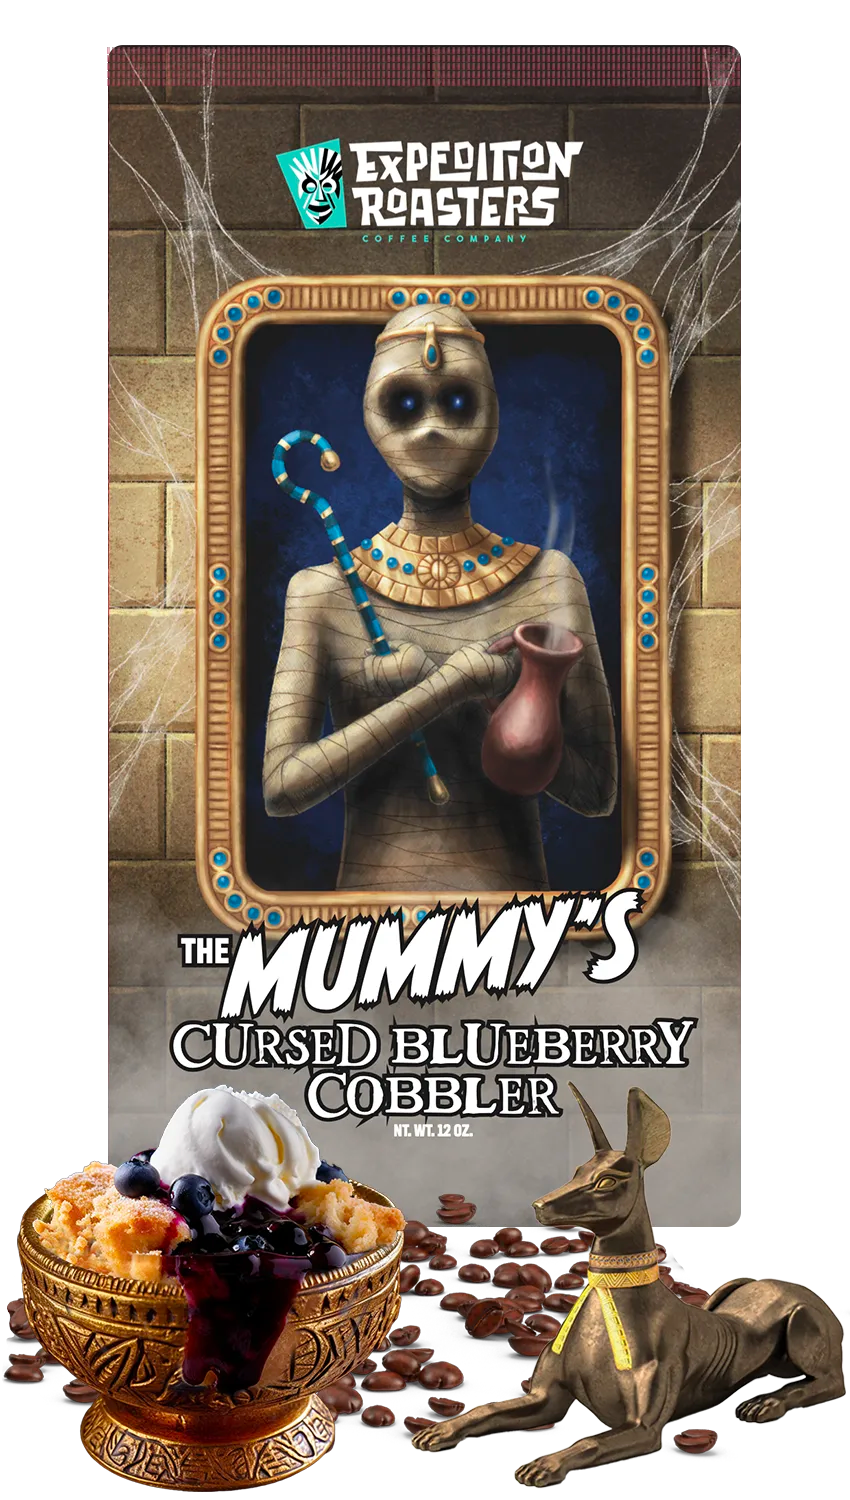 The Mummy's Cursed Blueberry Cobbler